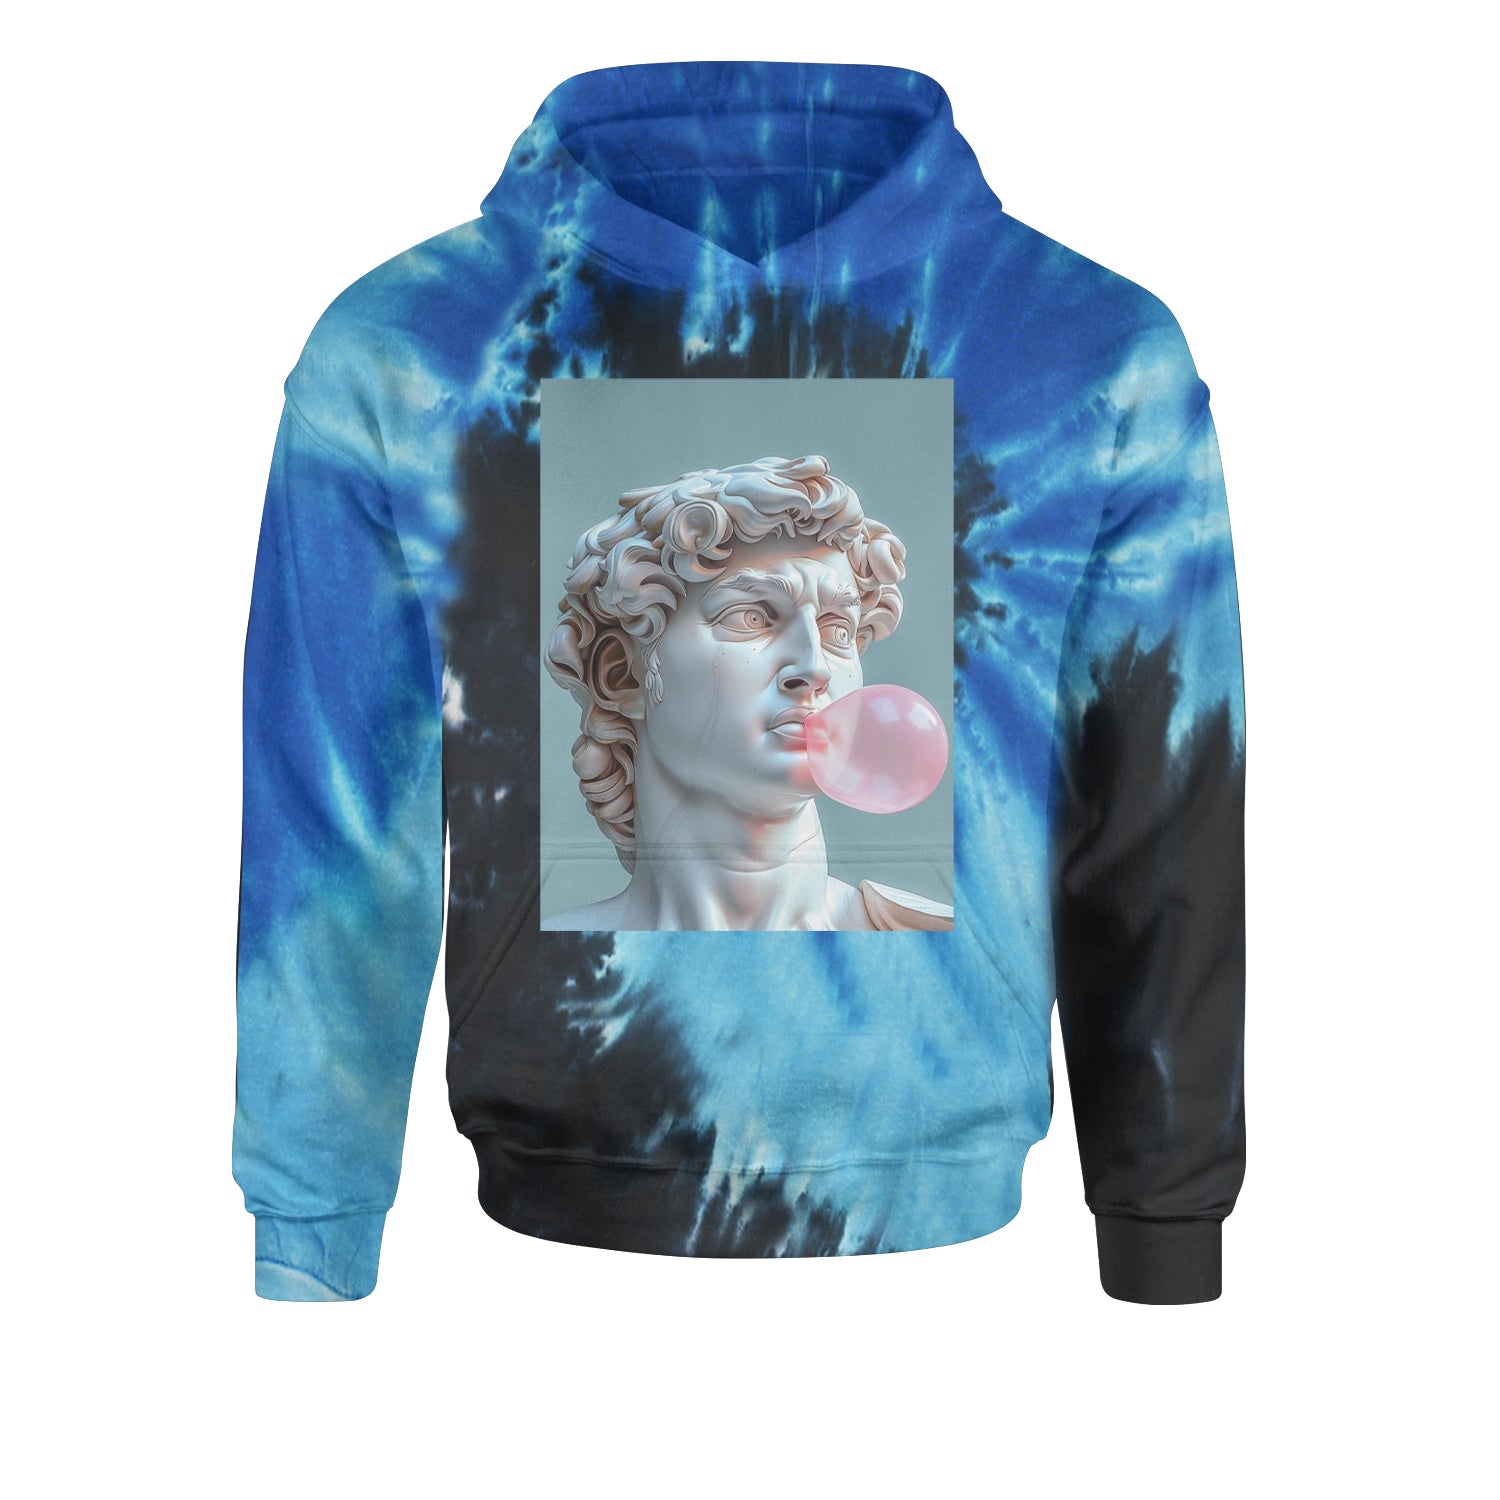 Michelangelo's David with Bubble Gum Contemporary Statue Art Youth-Sized Hoodie Tie-Dye Blue Ocean